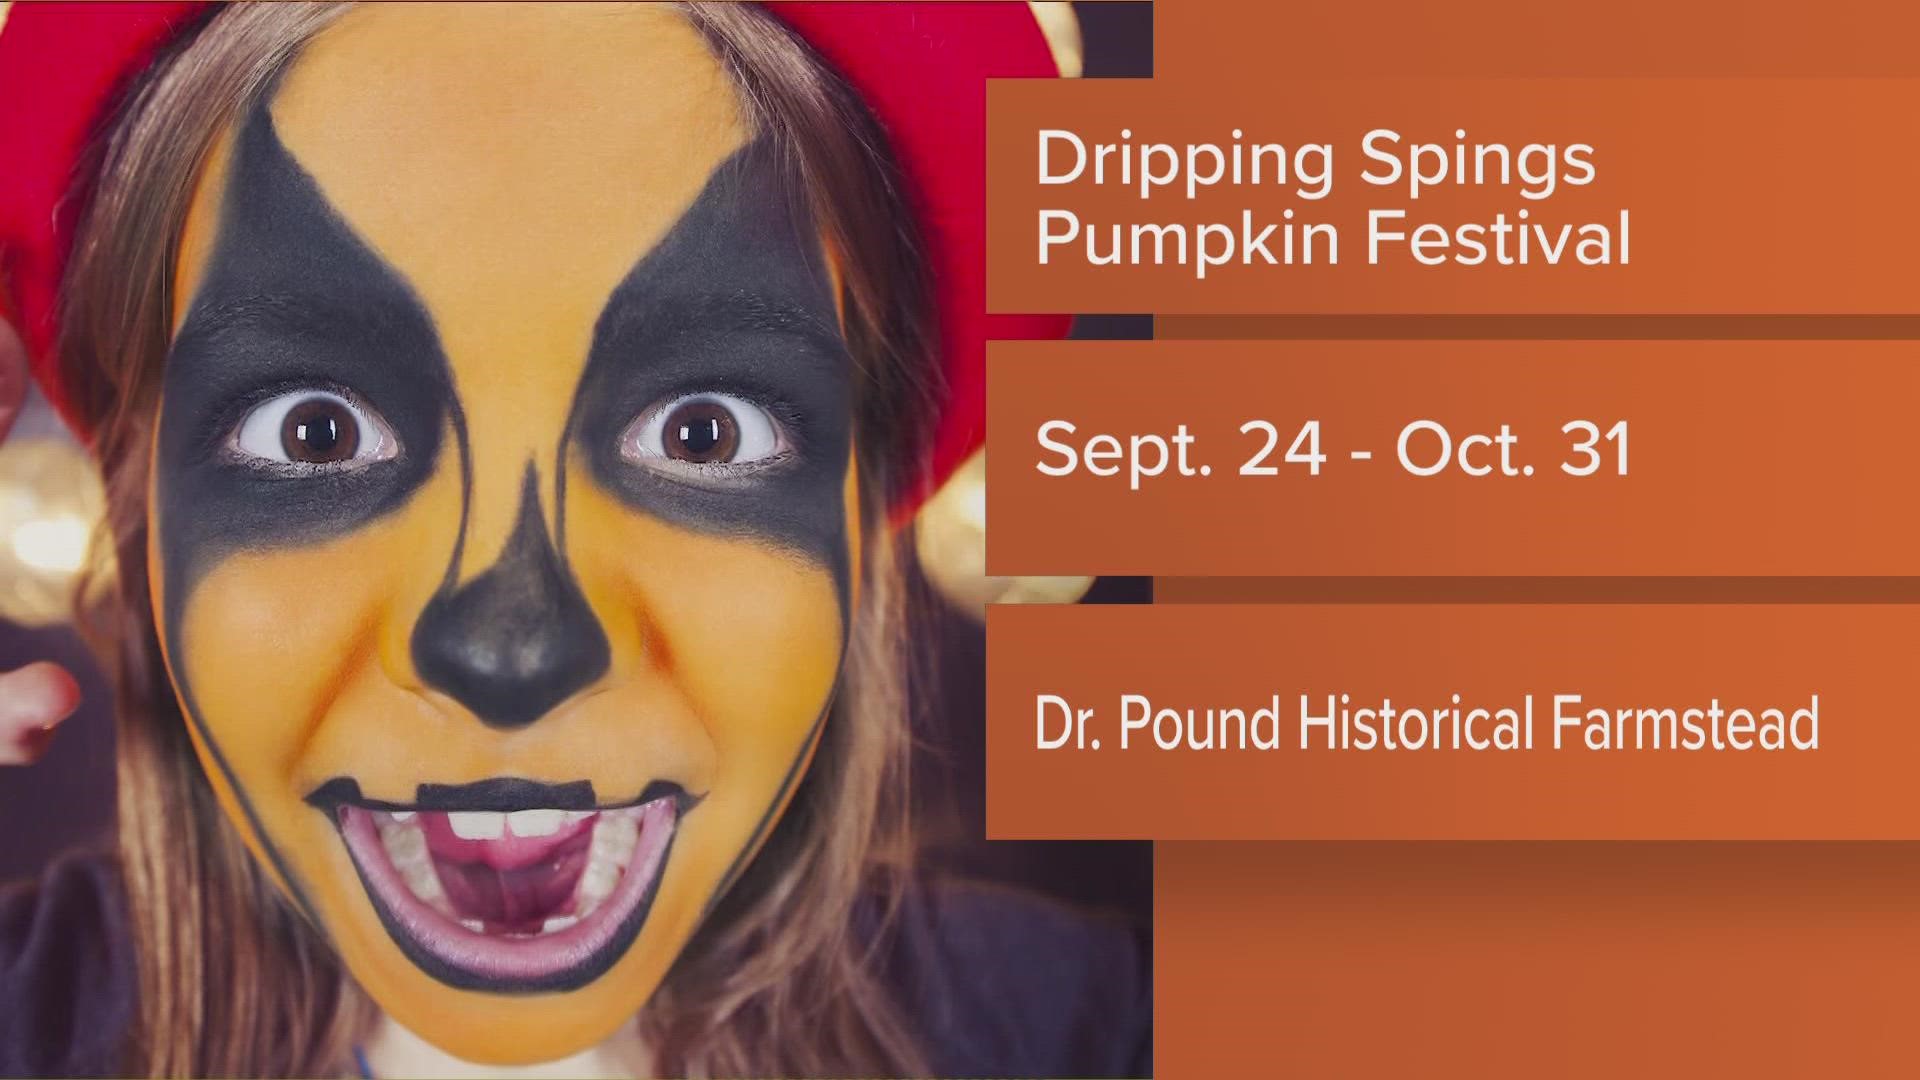 The Dripping Springs Pumpkin Festival starts on Saturday!